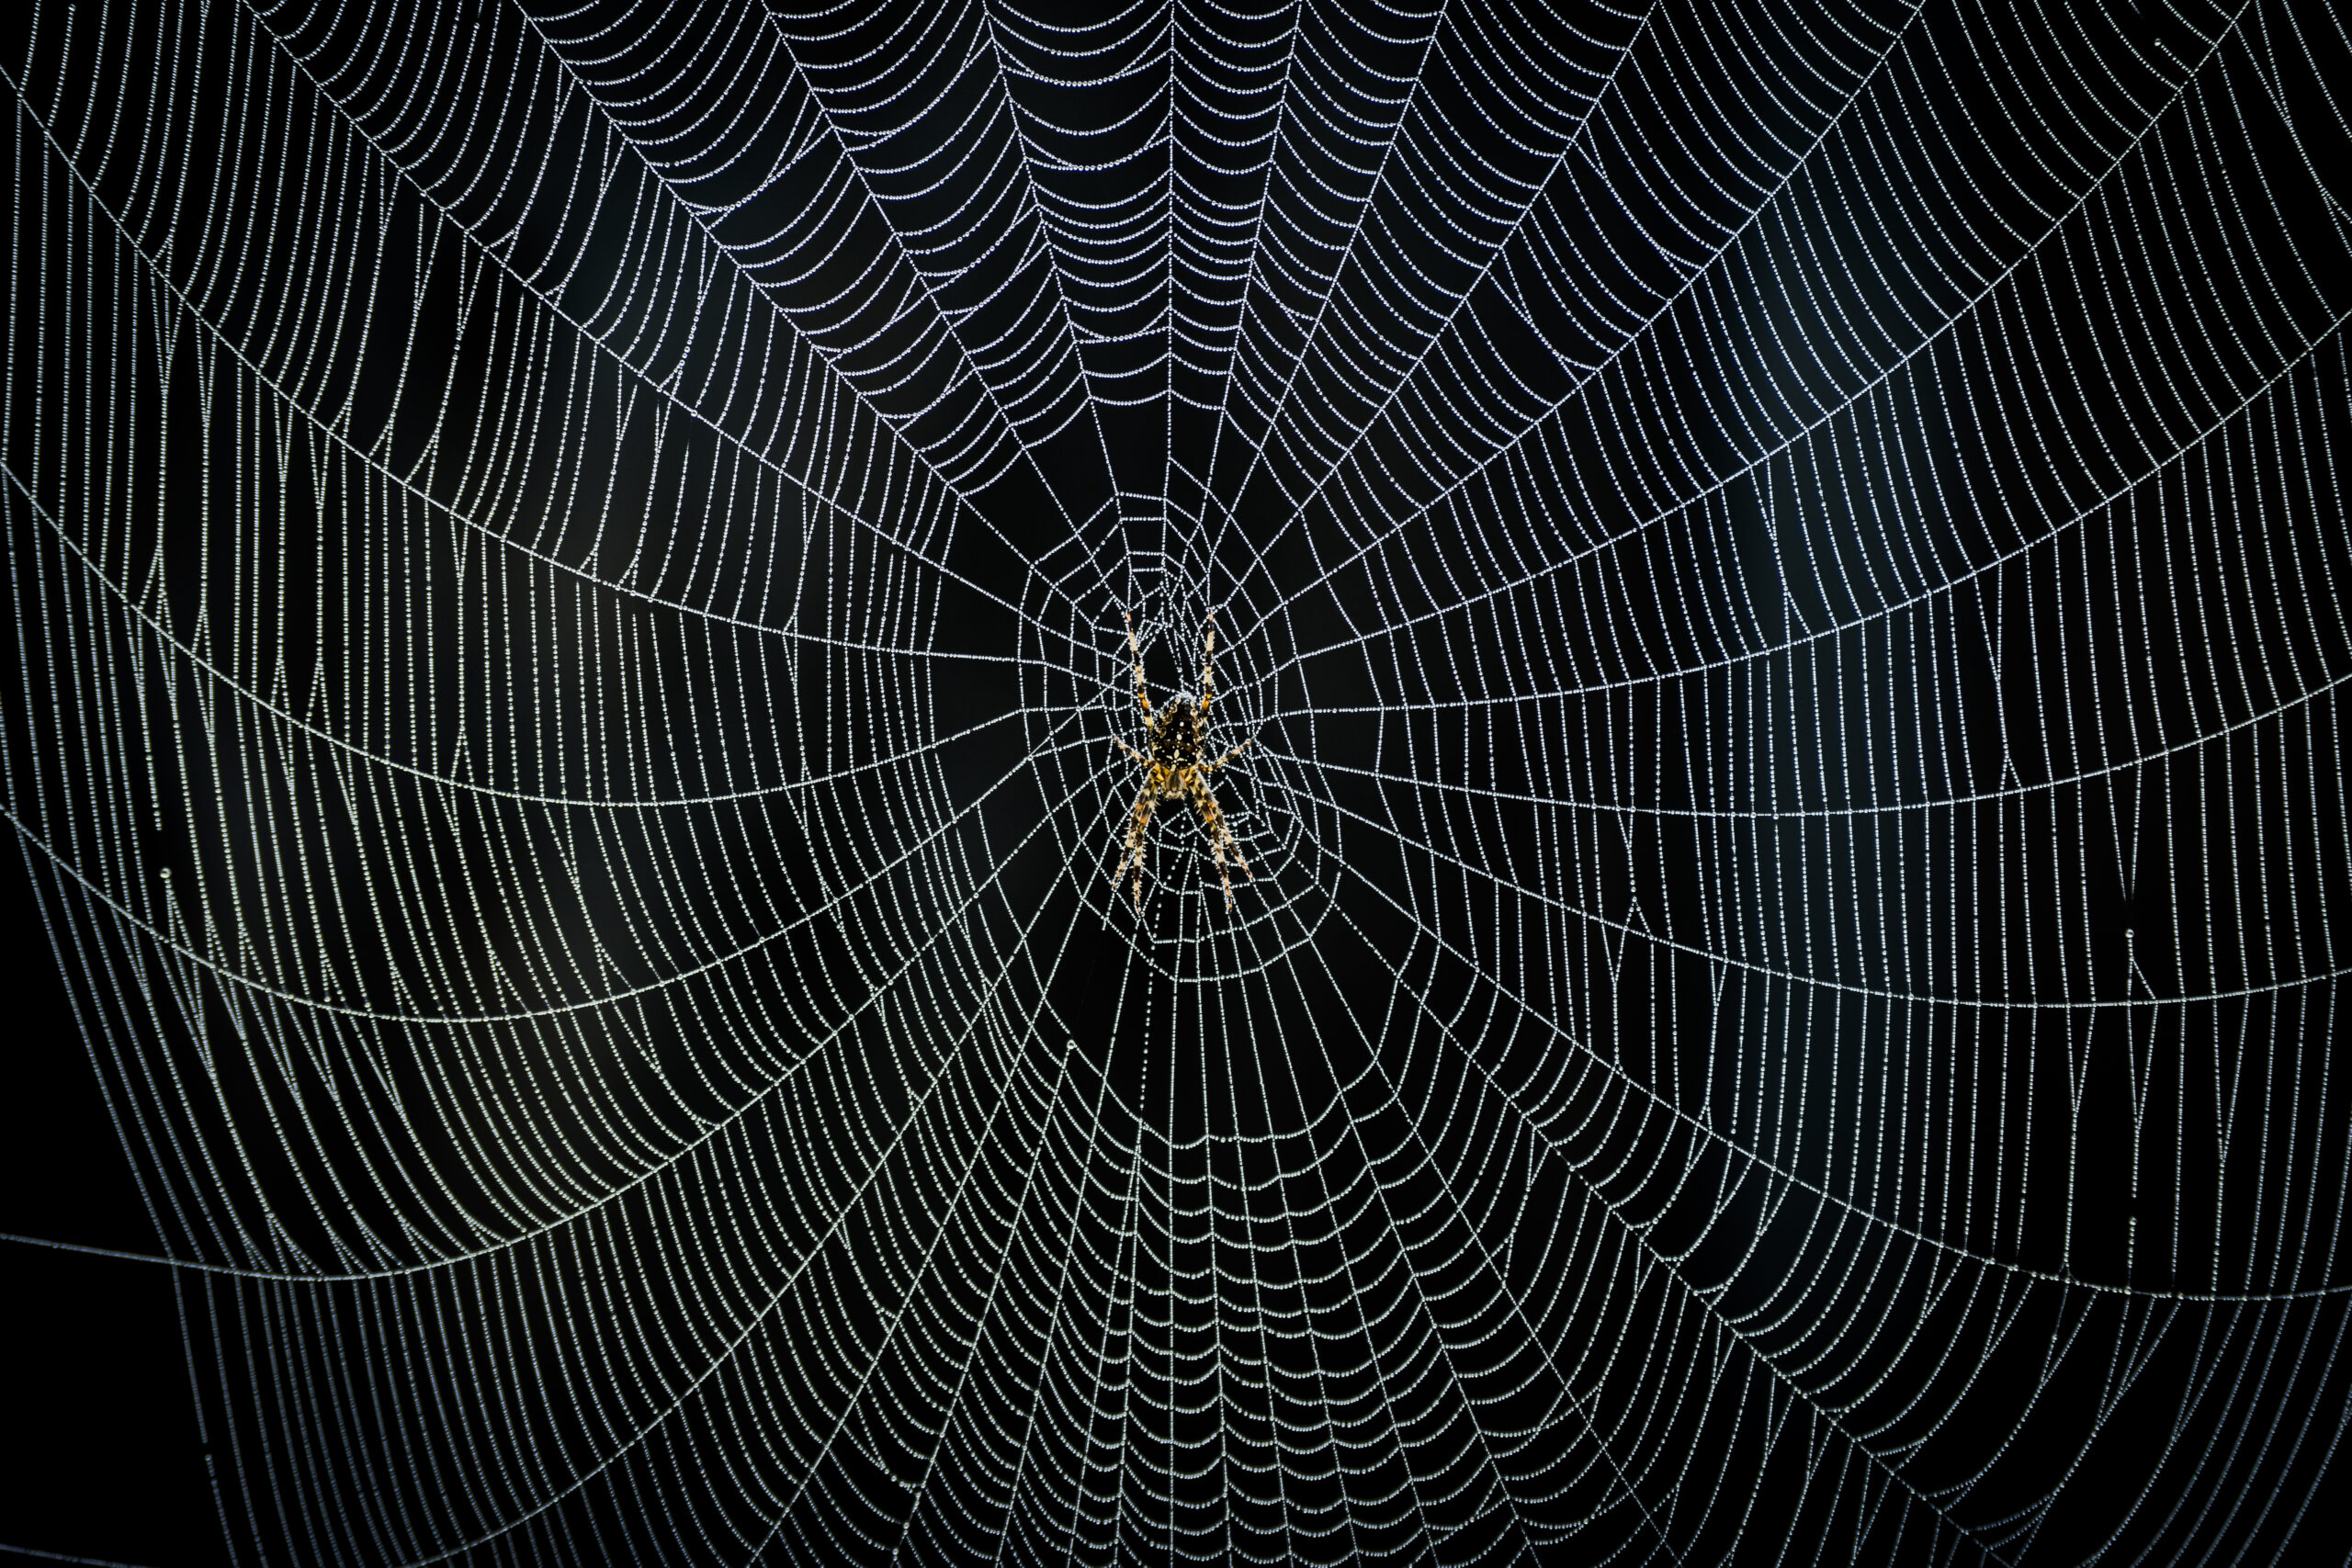 Spider creating its web on a black background